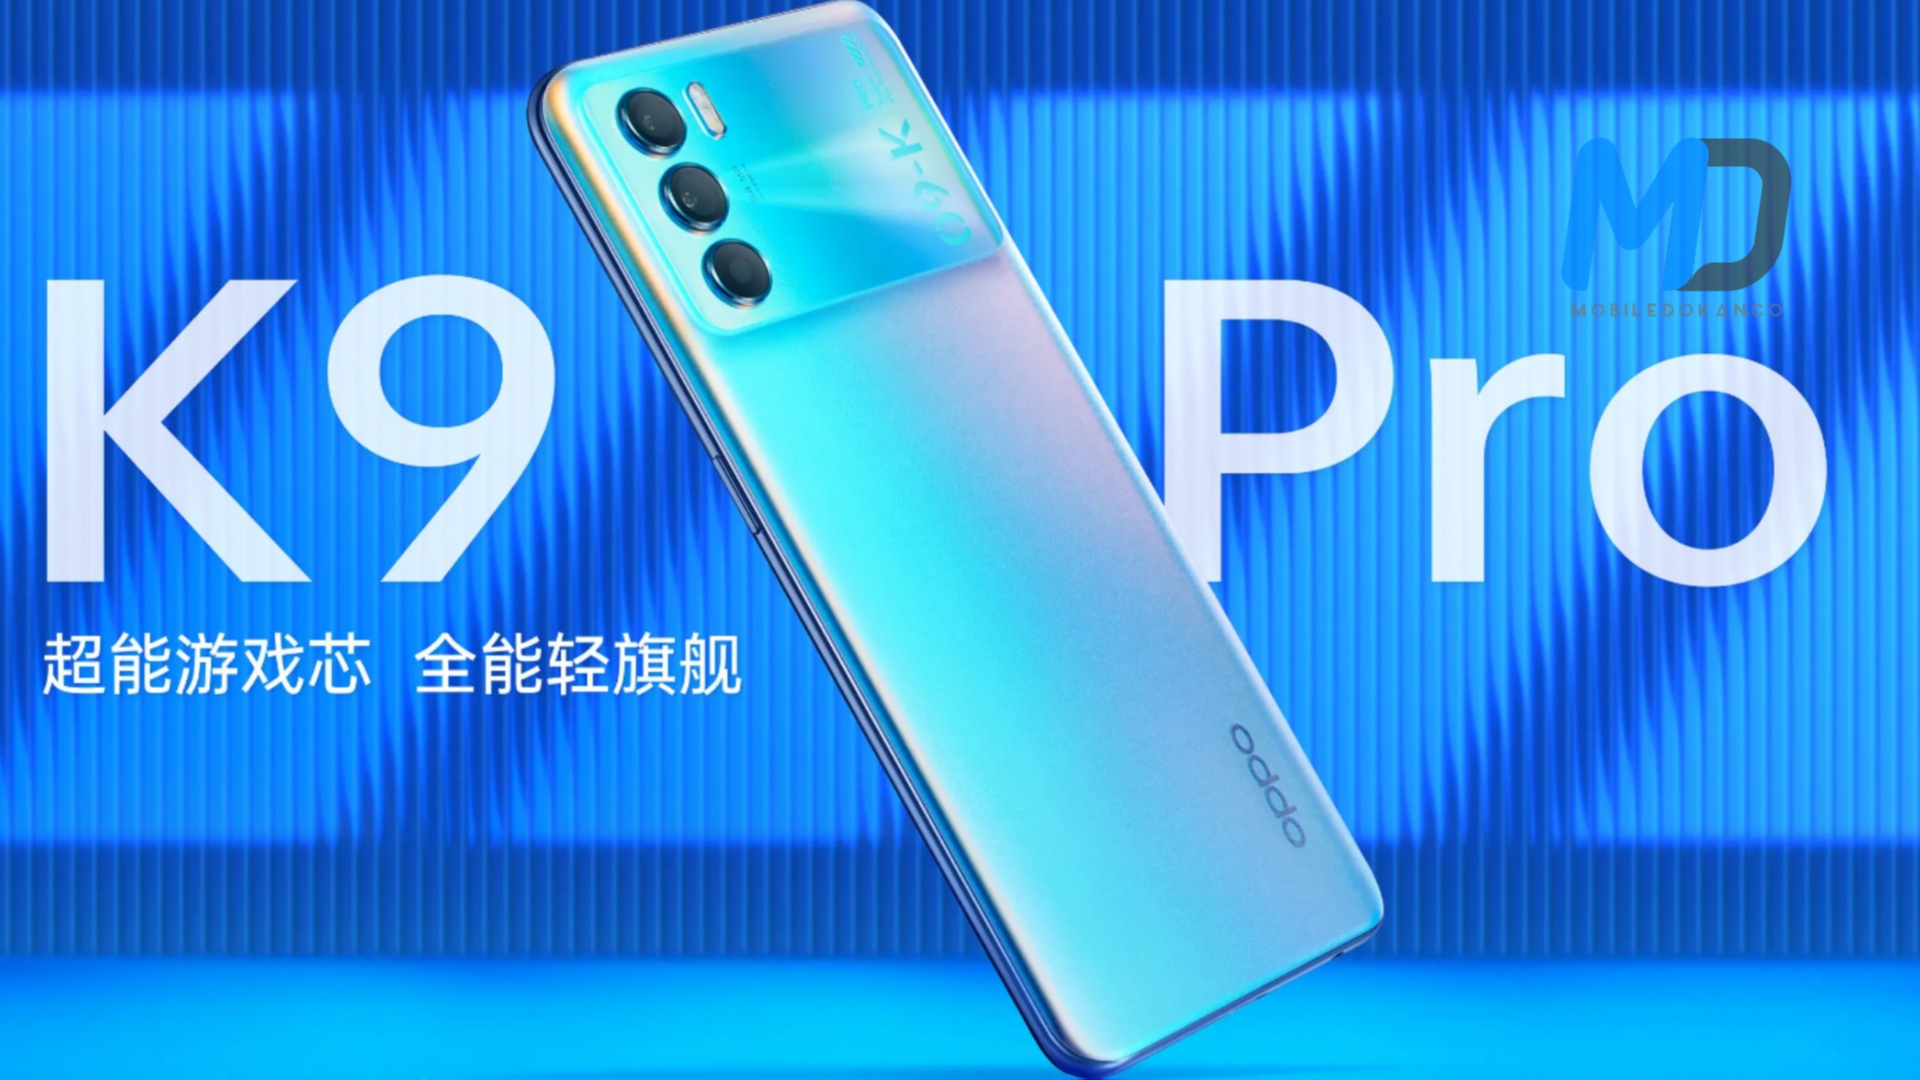 OPPO K9 Pro arrives with a 120Hz display, Dimensity 1200